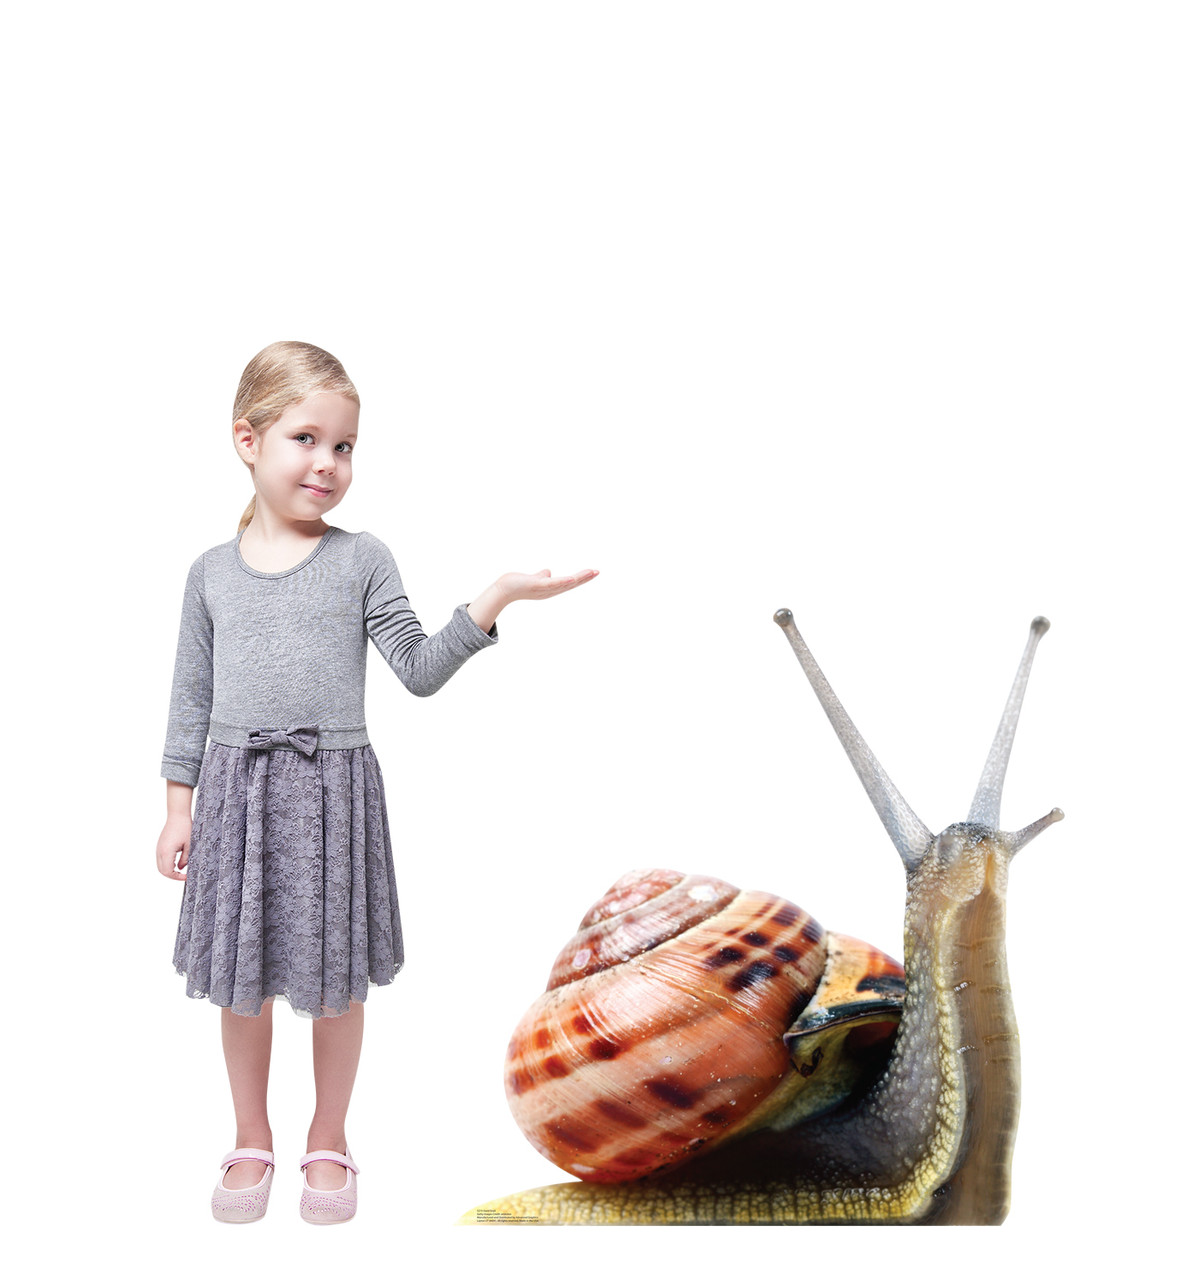 Life-size cardboard standee of a Giant Snail with model.